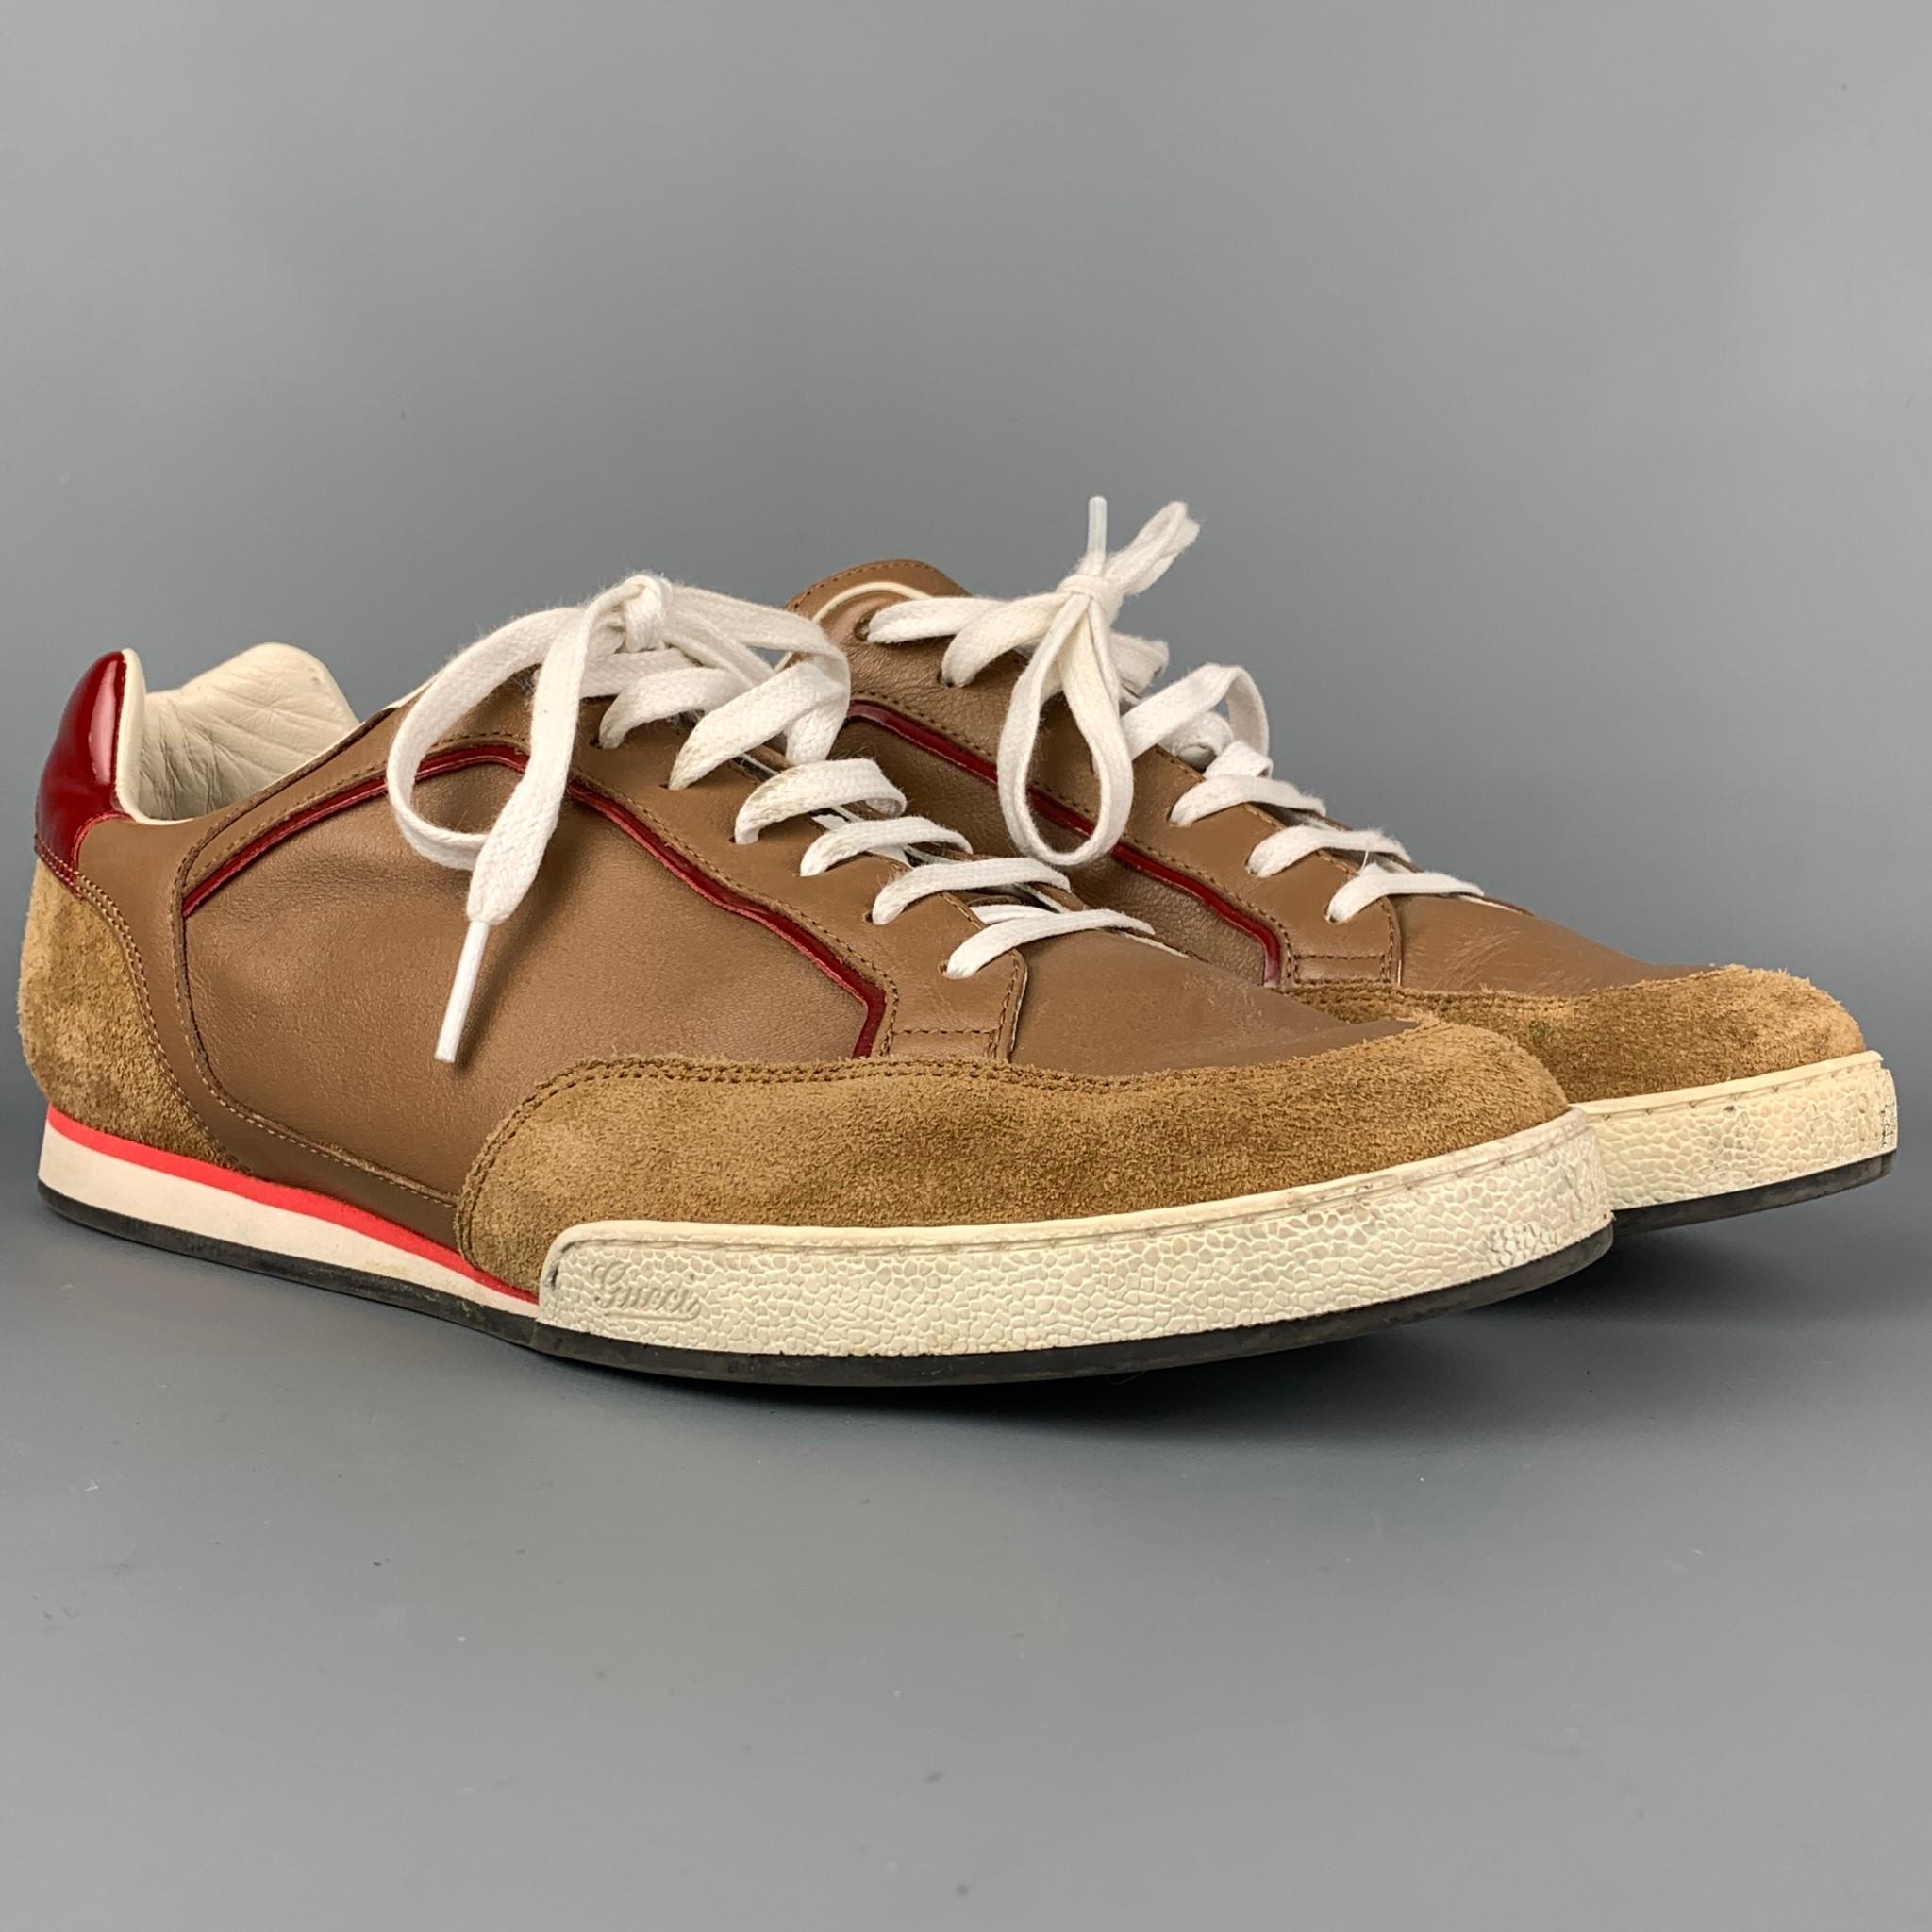 GUCCI sneakers comes in a tan & red suede featuring a patent leather trim, rubber sole, and a lace up closure. Made in Italy. 

Very Good Pre-Owned Condition.
Marked: 338786 8.5G
Original Retail Price: $650.00

Outsole: 11.25 in. x 4 in. 